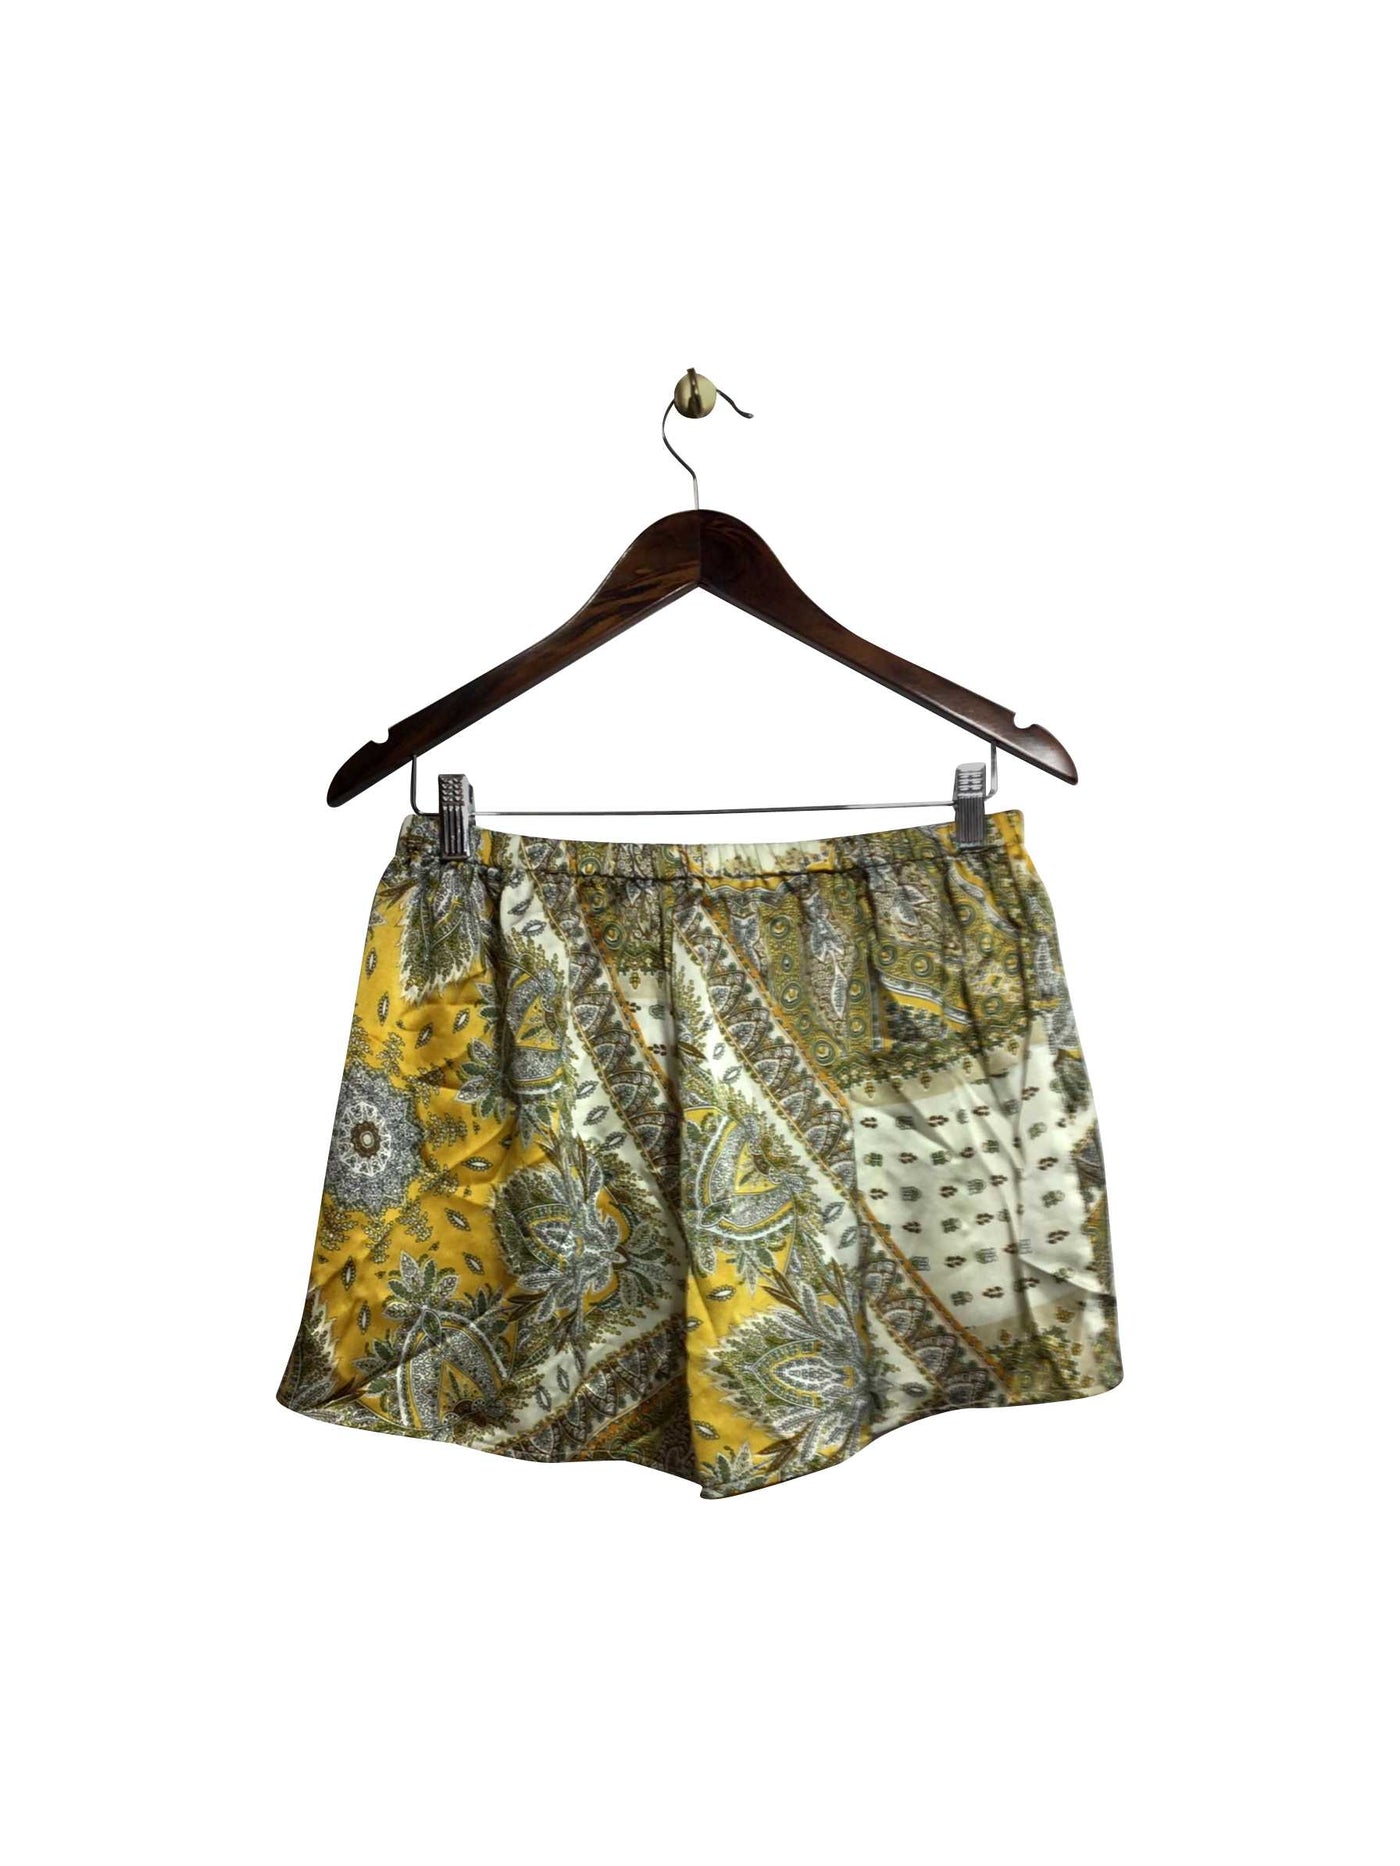 CIDER Regular fit Pant Shorts in Yellow - Size L | 8.99 $ KOOP